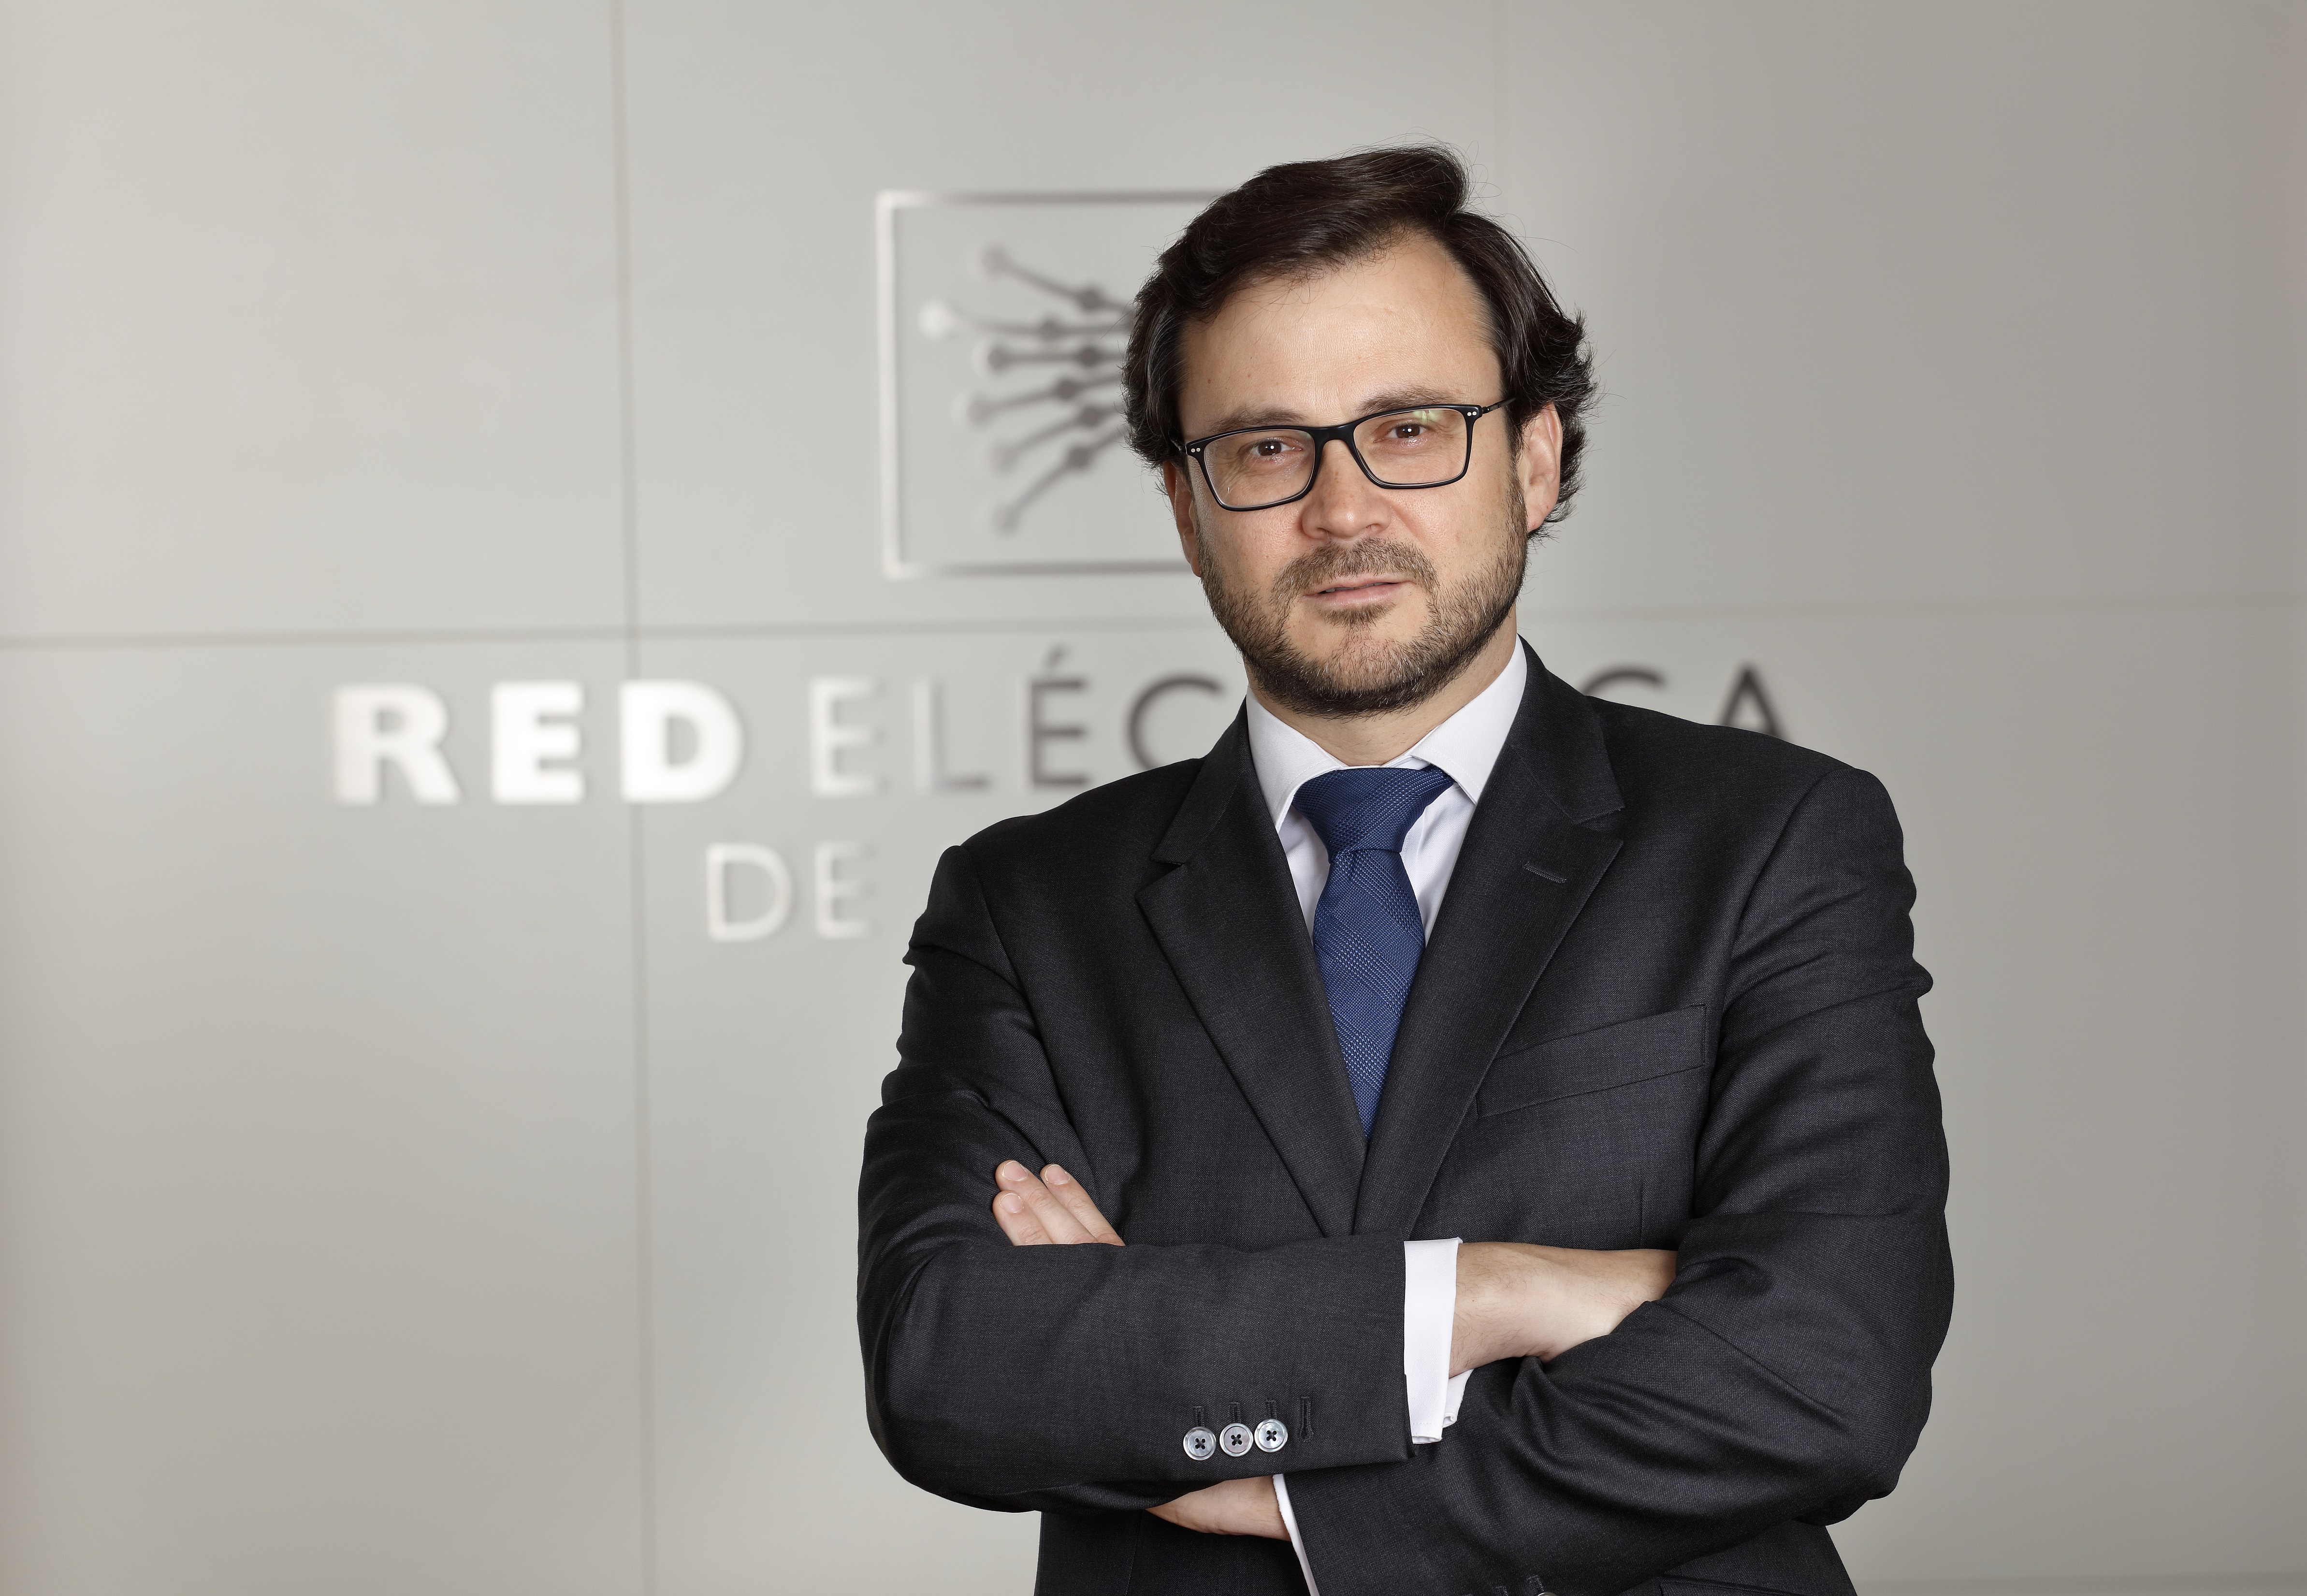 Appointment of the Secretary of the Board of Directors of Red Eléctrica Corporación